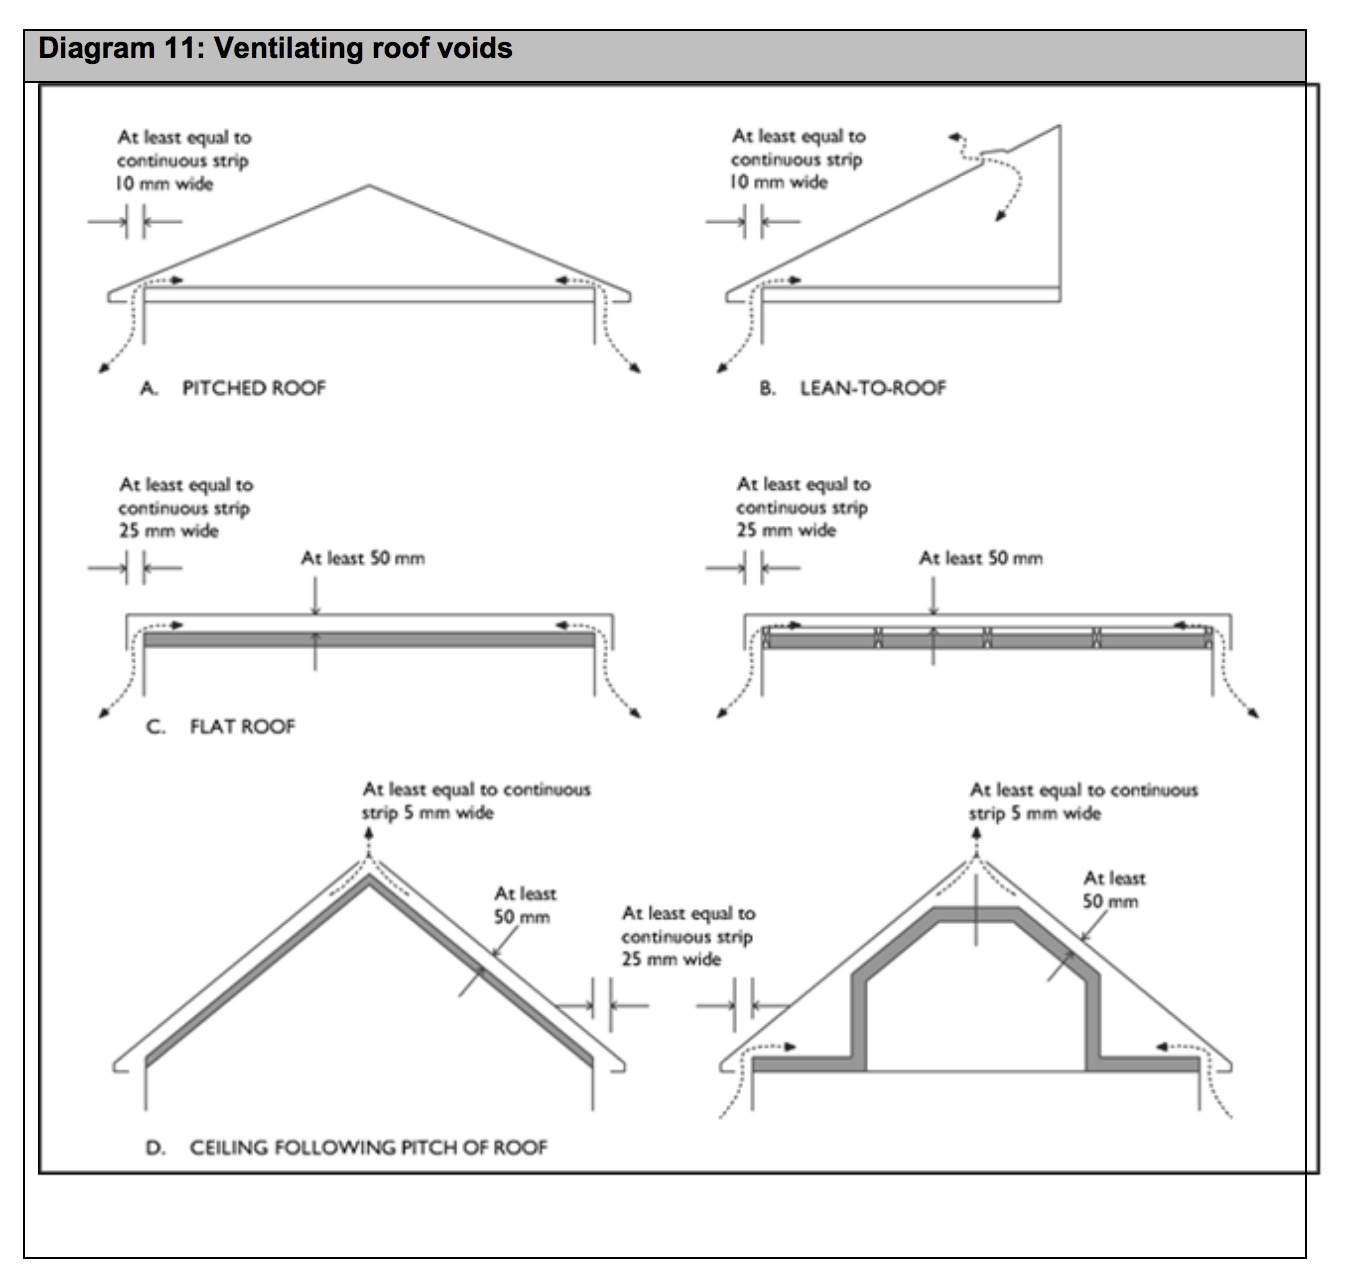 Diagram HF14 - Ventilating roof voids - Extract from TGD F